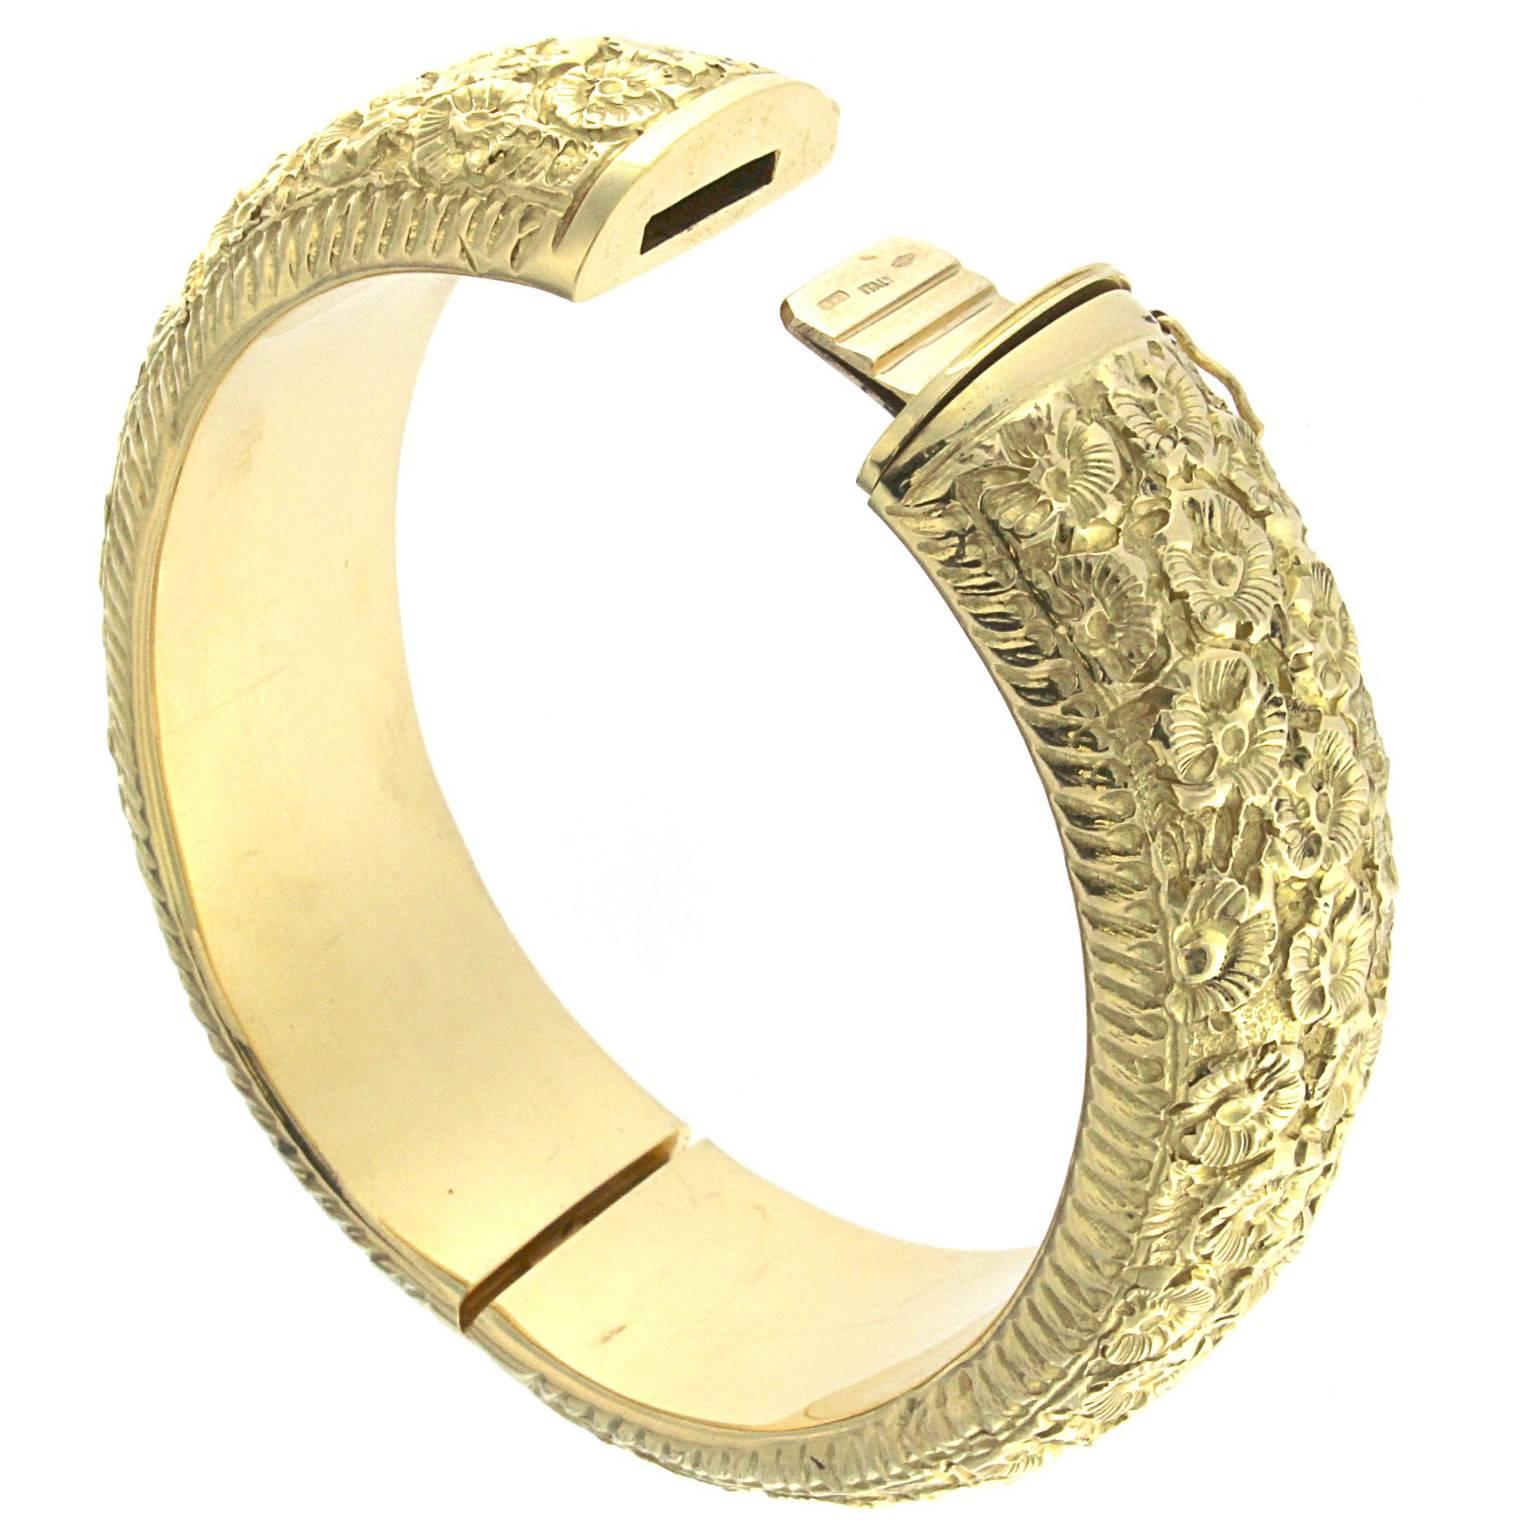 Gorgeous bracelet molded to the art to better adhere to the oval anatomy of the woman's wrist, embellished by hand chiseling. This bracelet is part of the Roserosse collection
The chiseling is an almost disappearing ancient art of fully manual